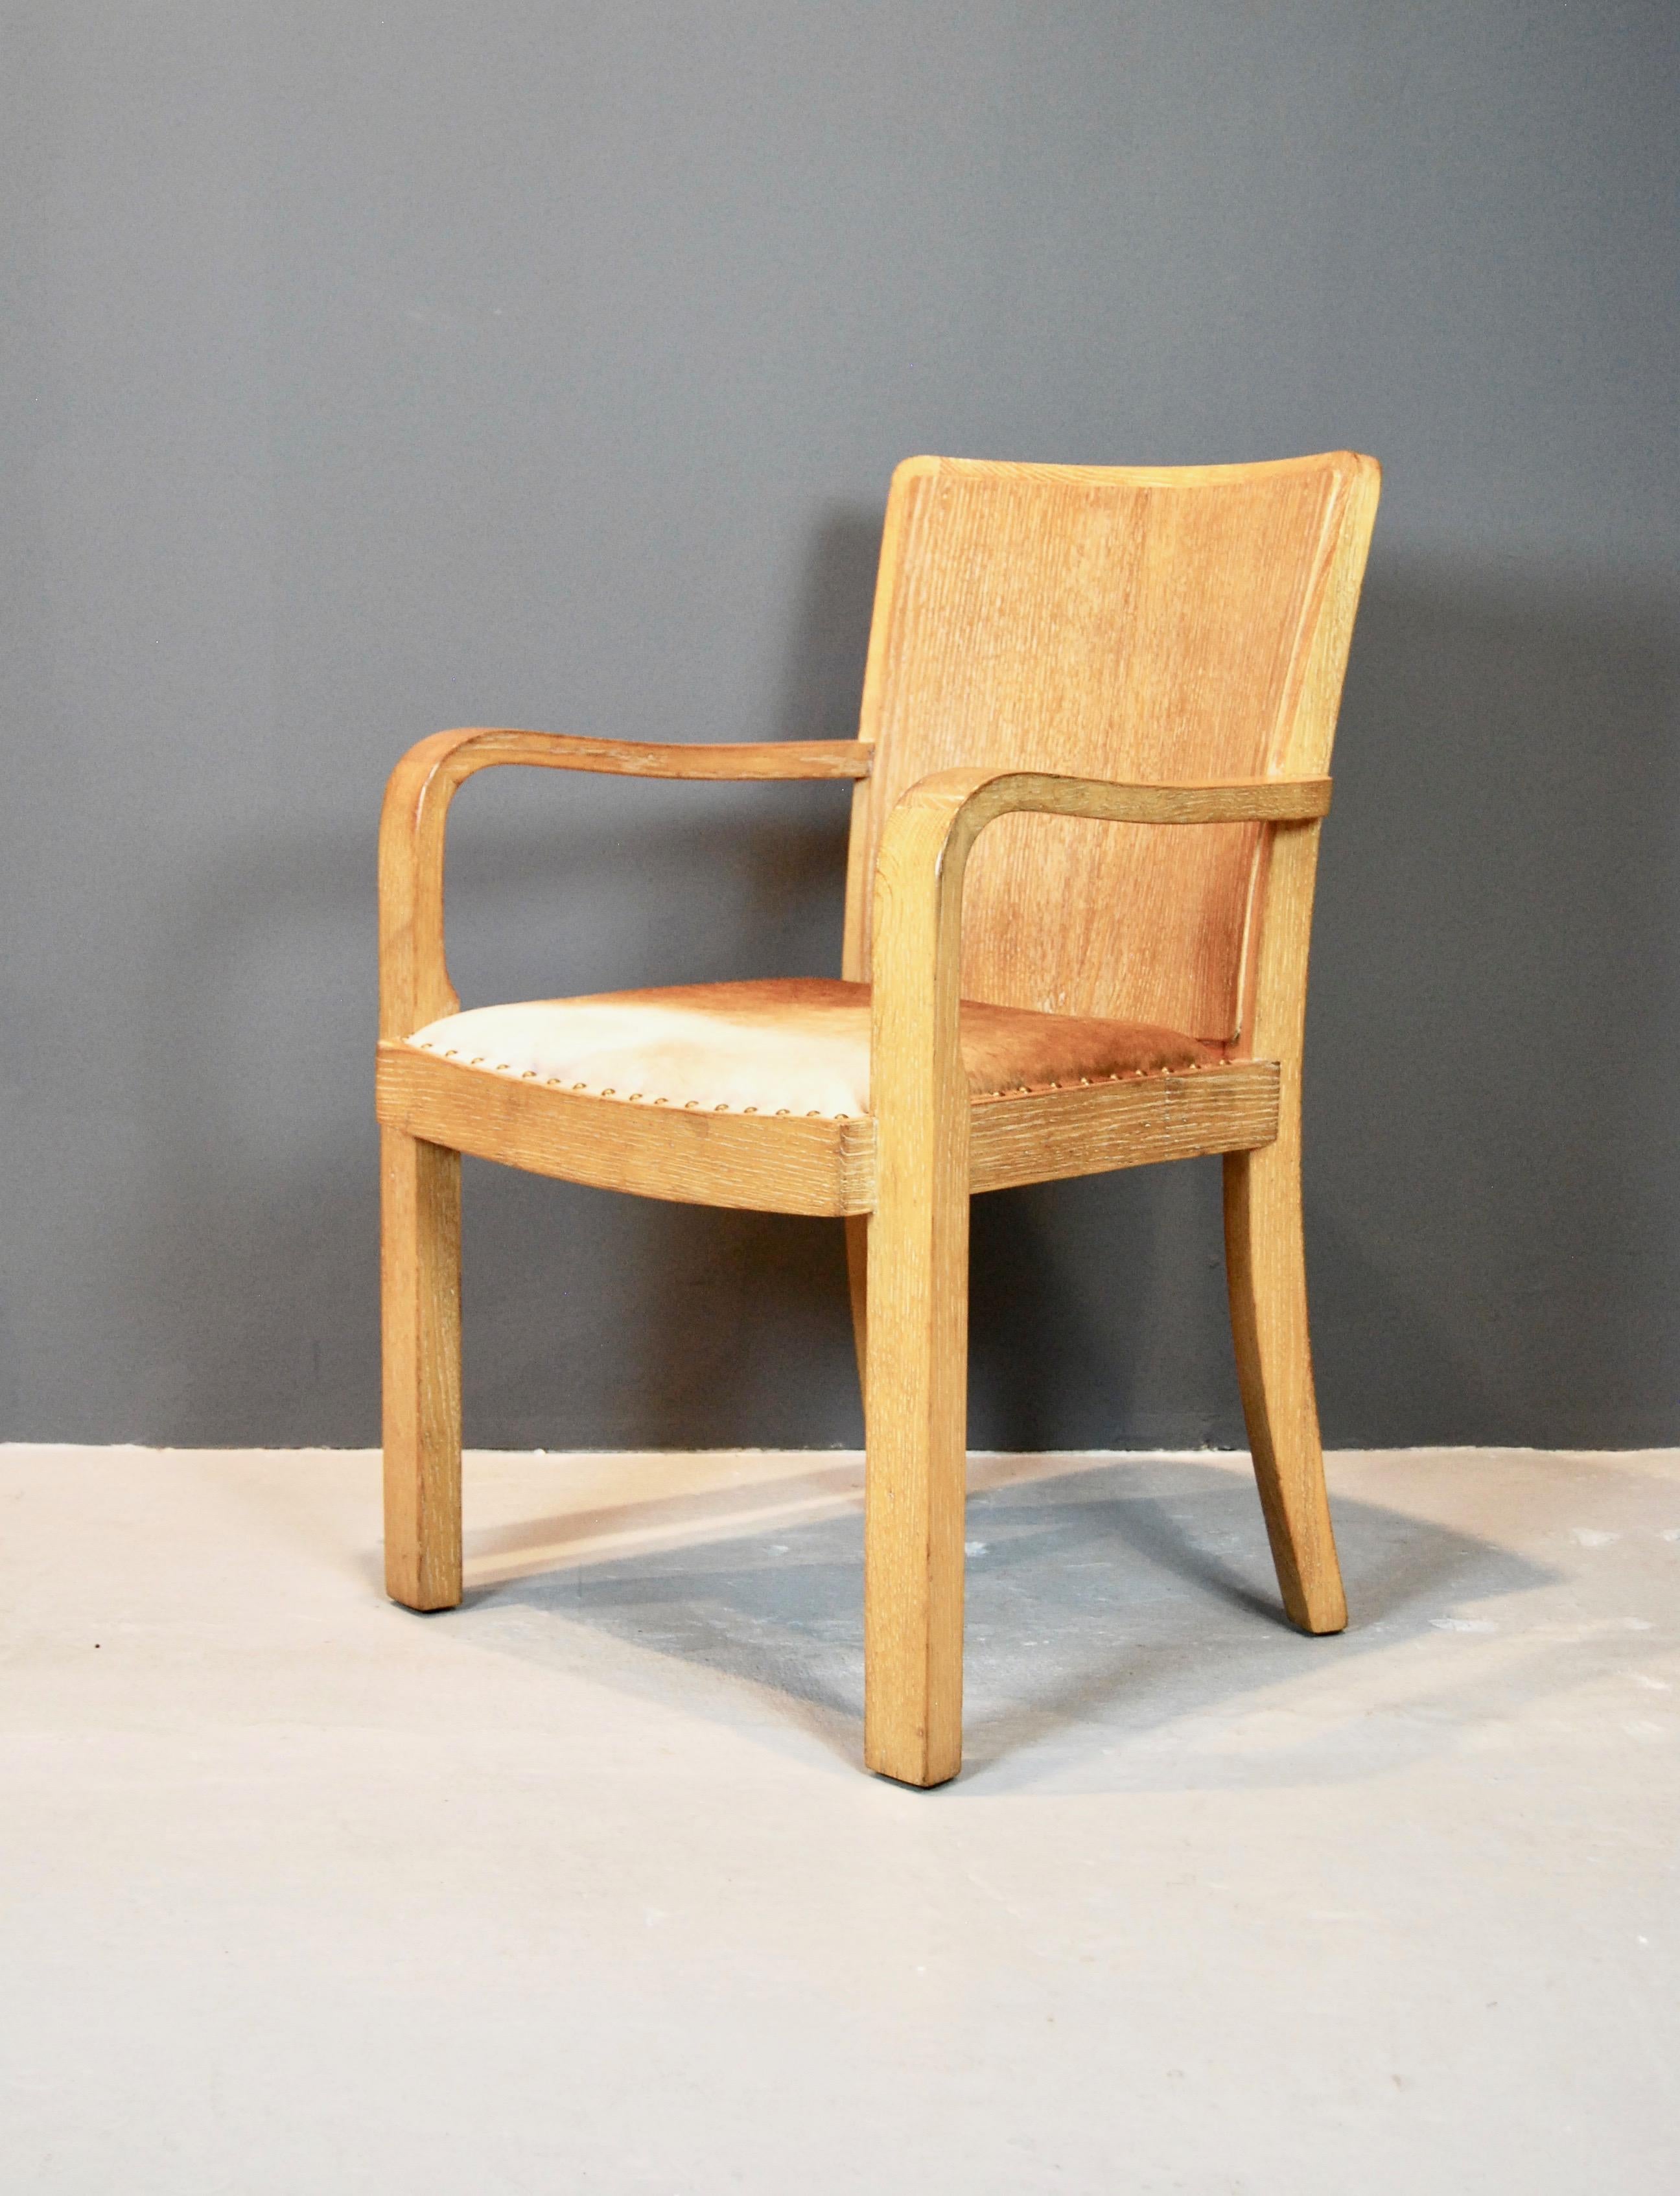 Great scale armchair, perfect for a desk, made of straight cut oak, beautifully cerused. 
Two tone pony hide beautifully complements the wood.
 Jean-Michel Frank elements throughout.